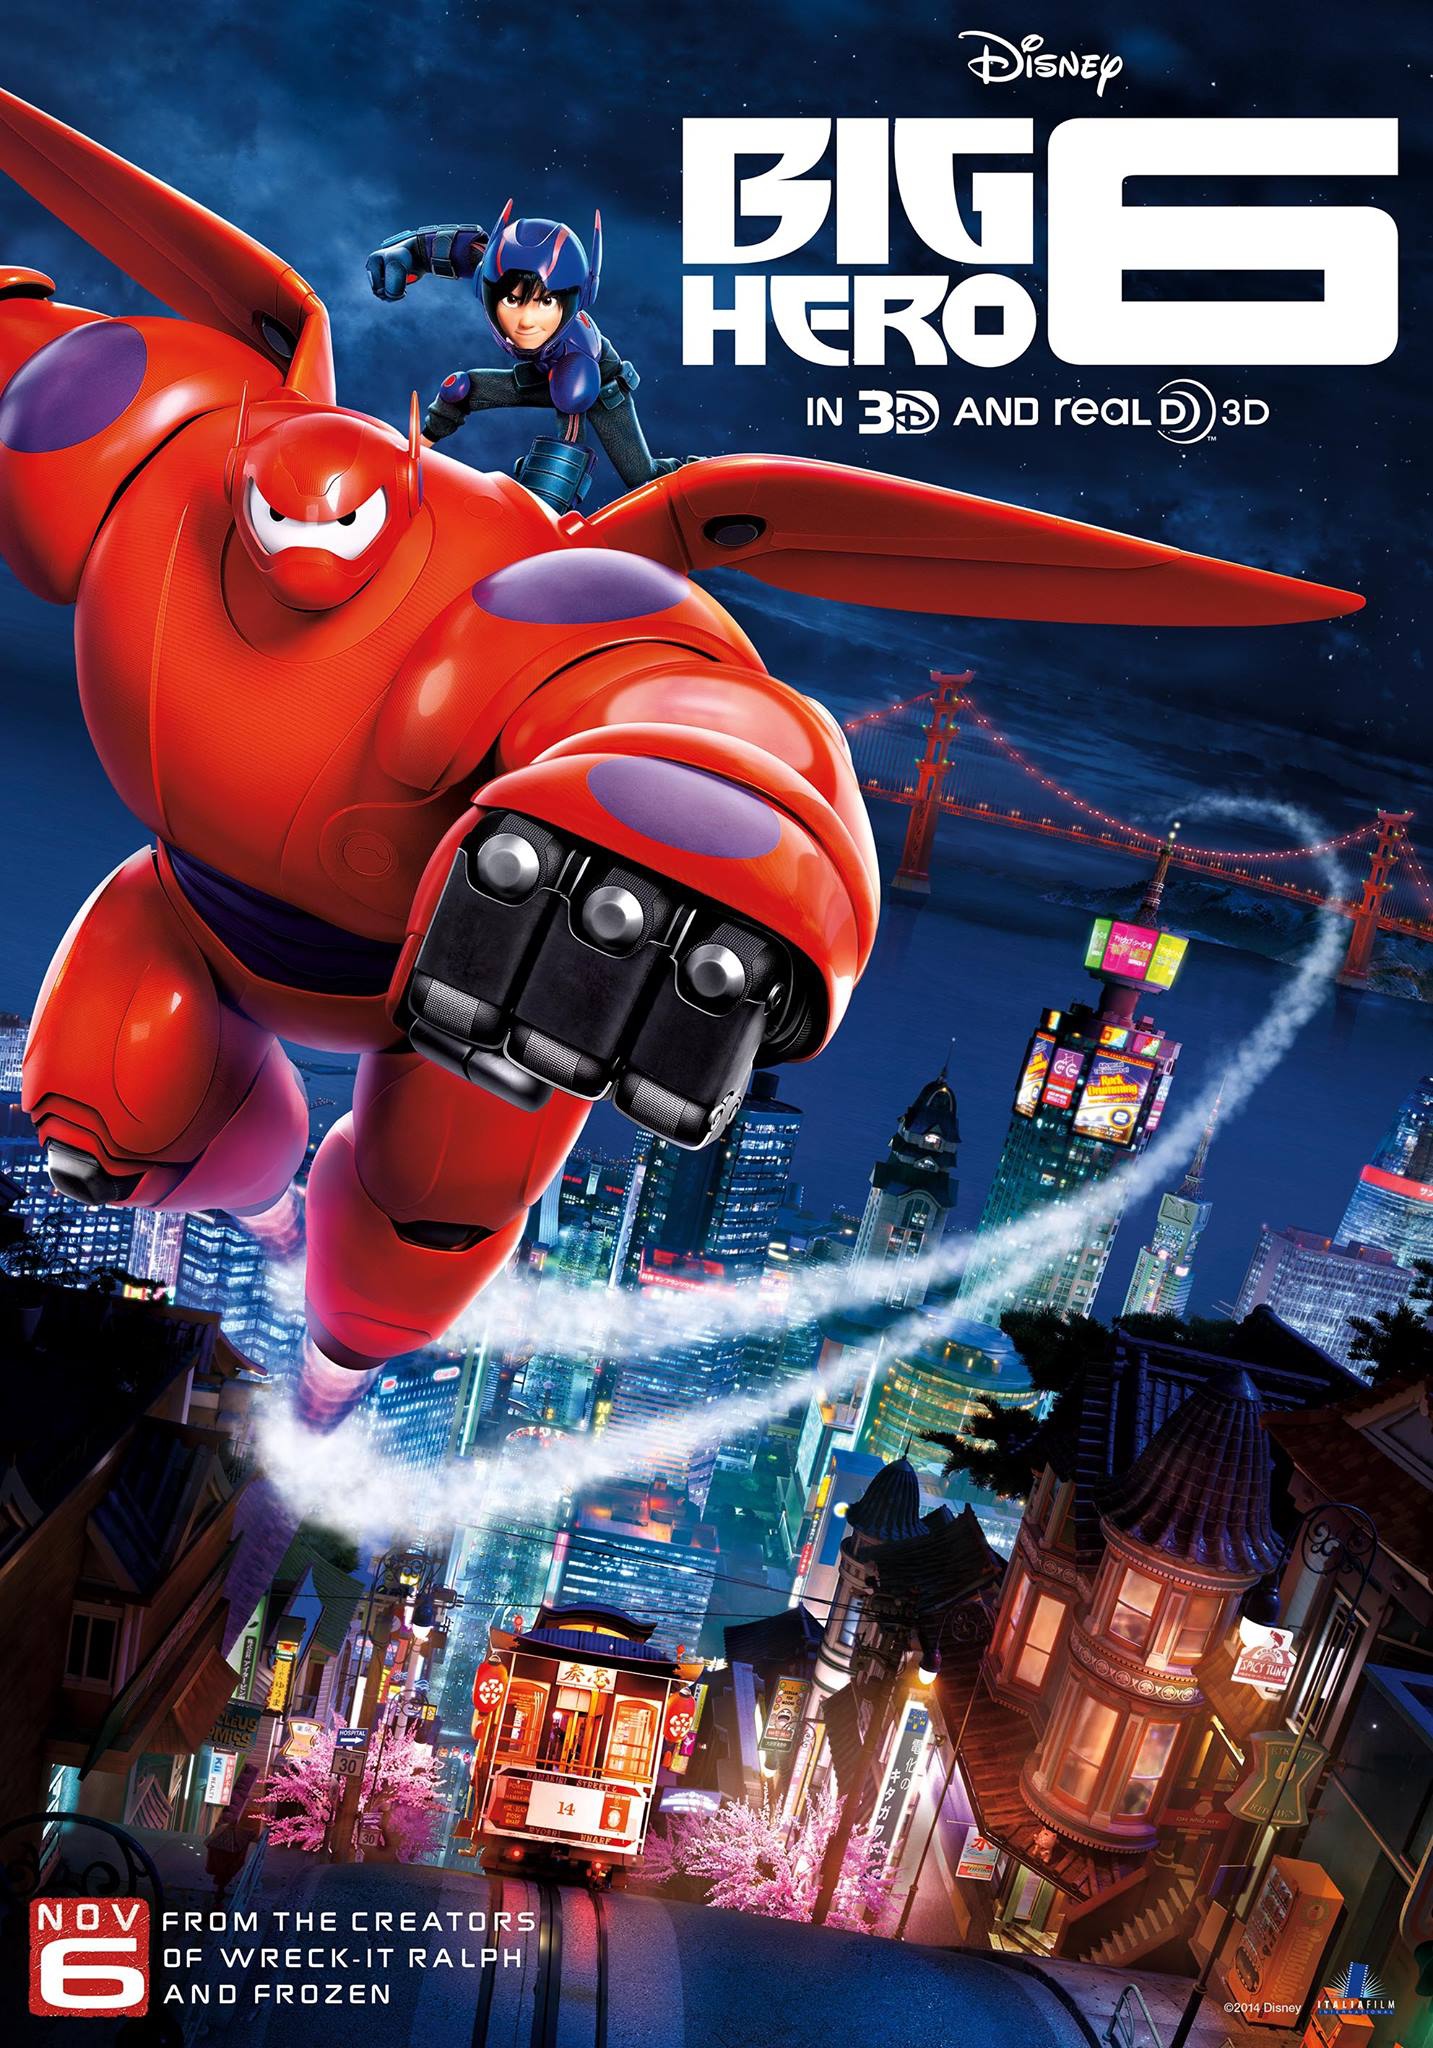 when did big hero 6 come out